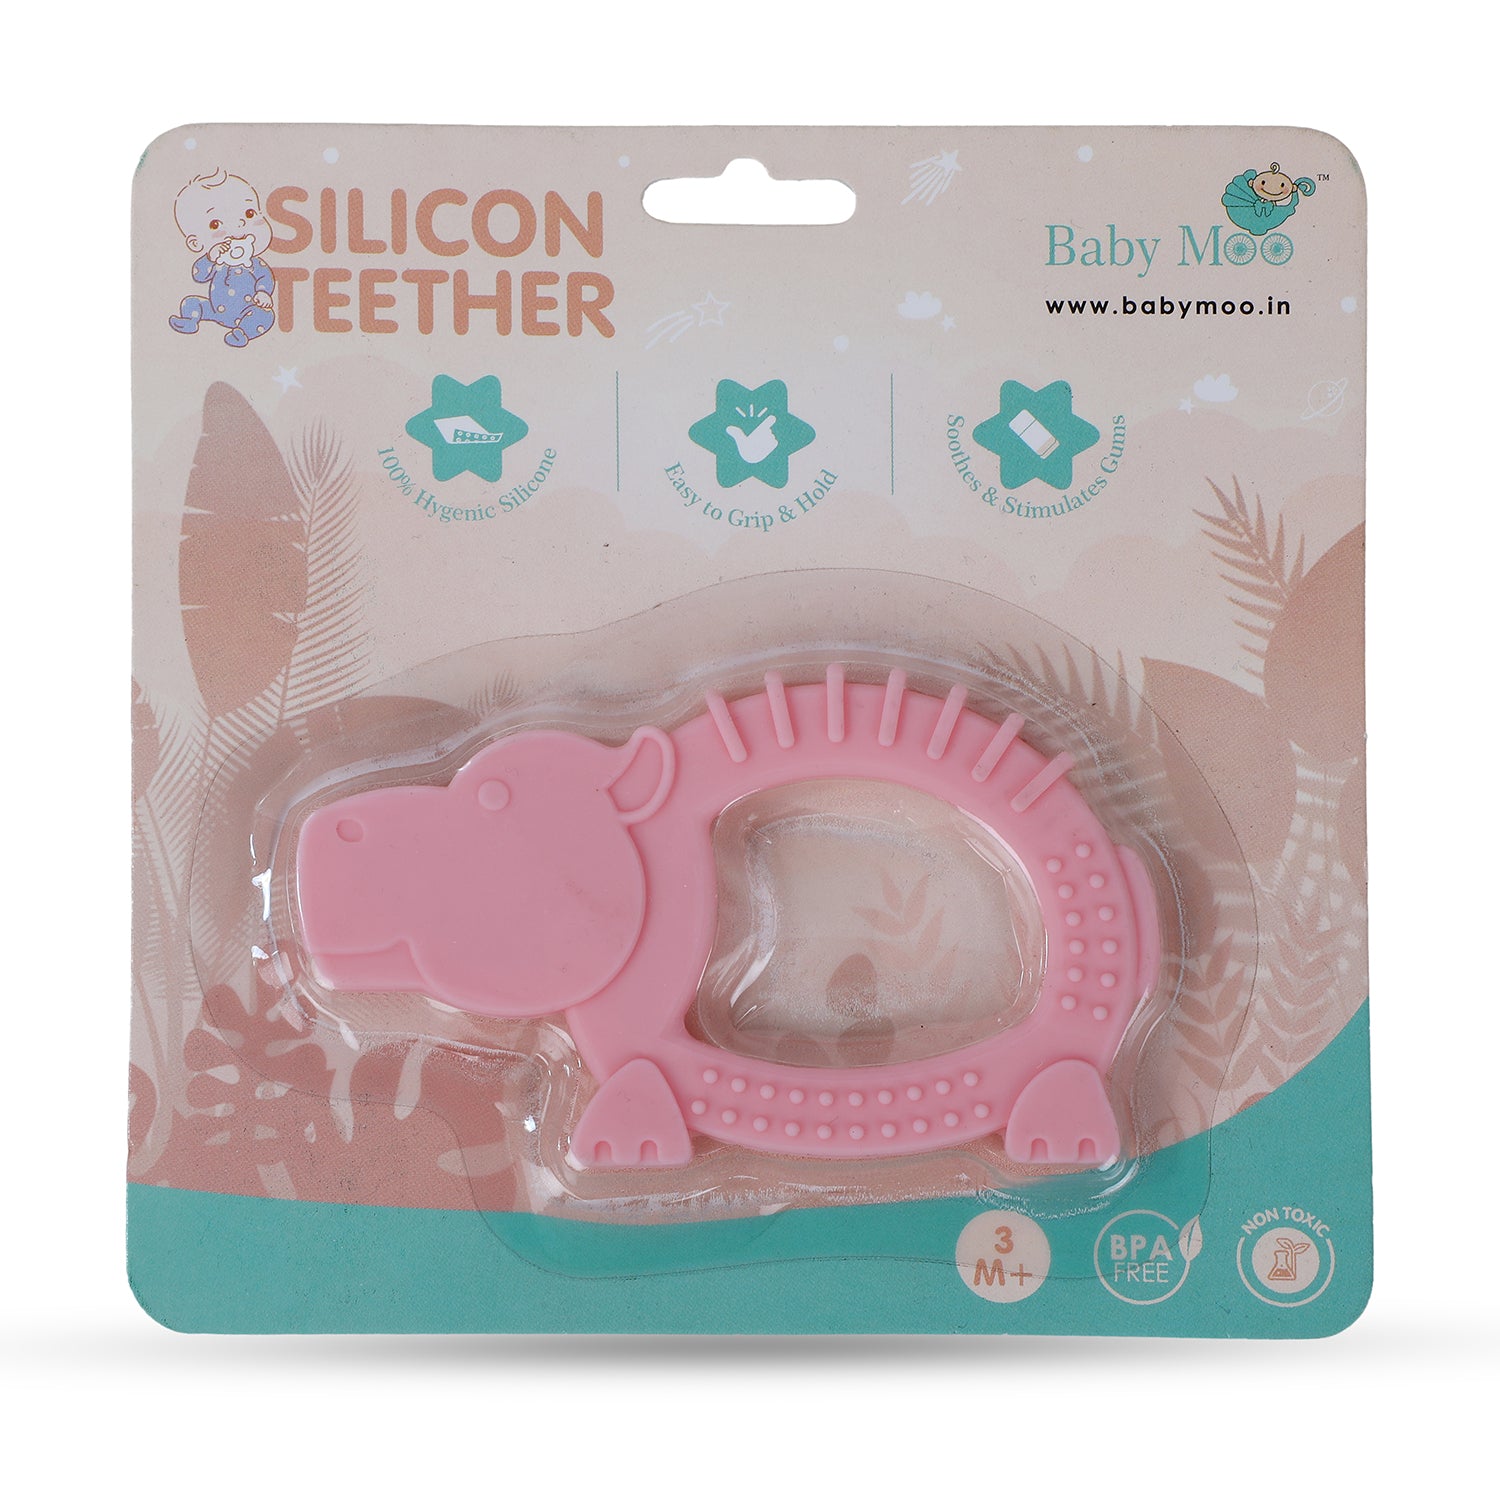 Baby Moo Hippo Soothing Silicon Teether BPA And Toxin Free - Pink - Baby Moo